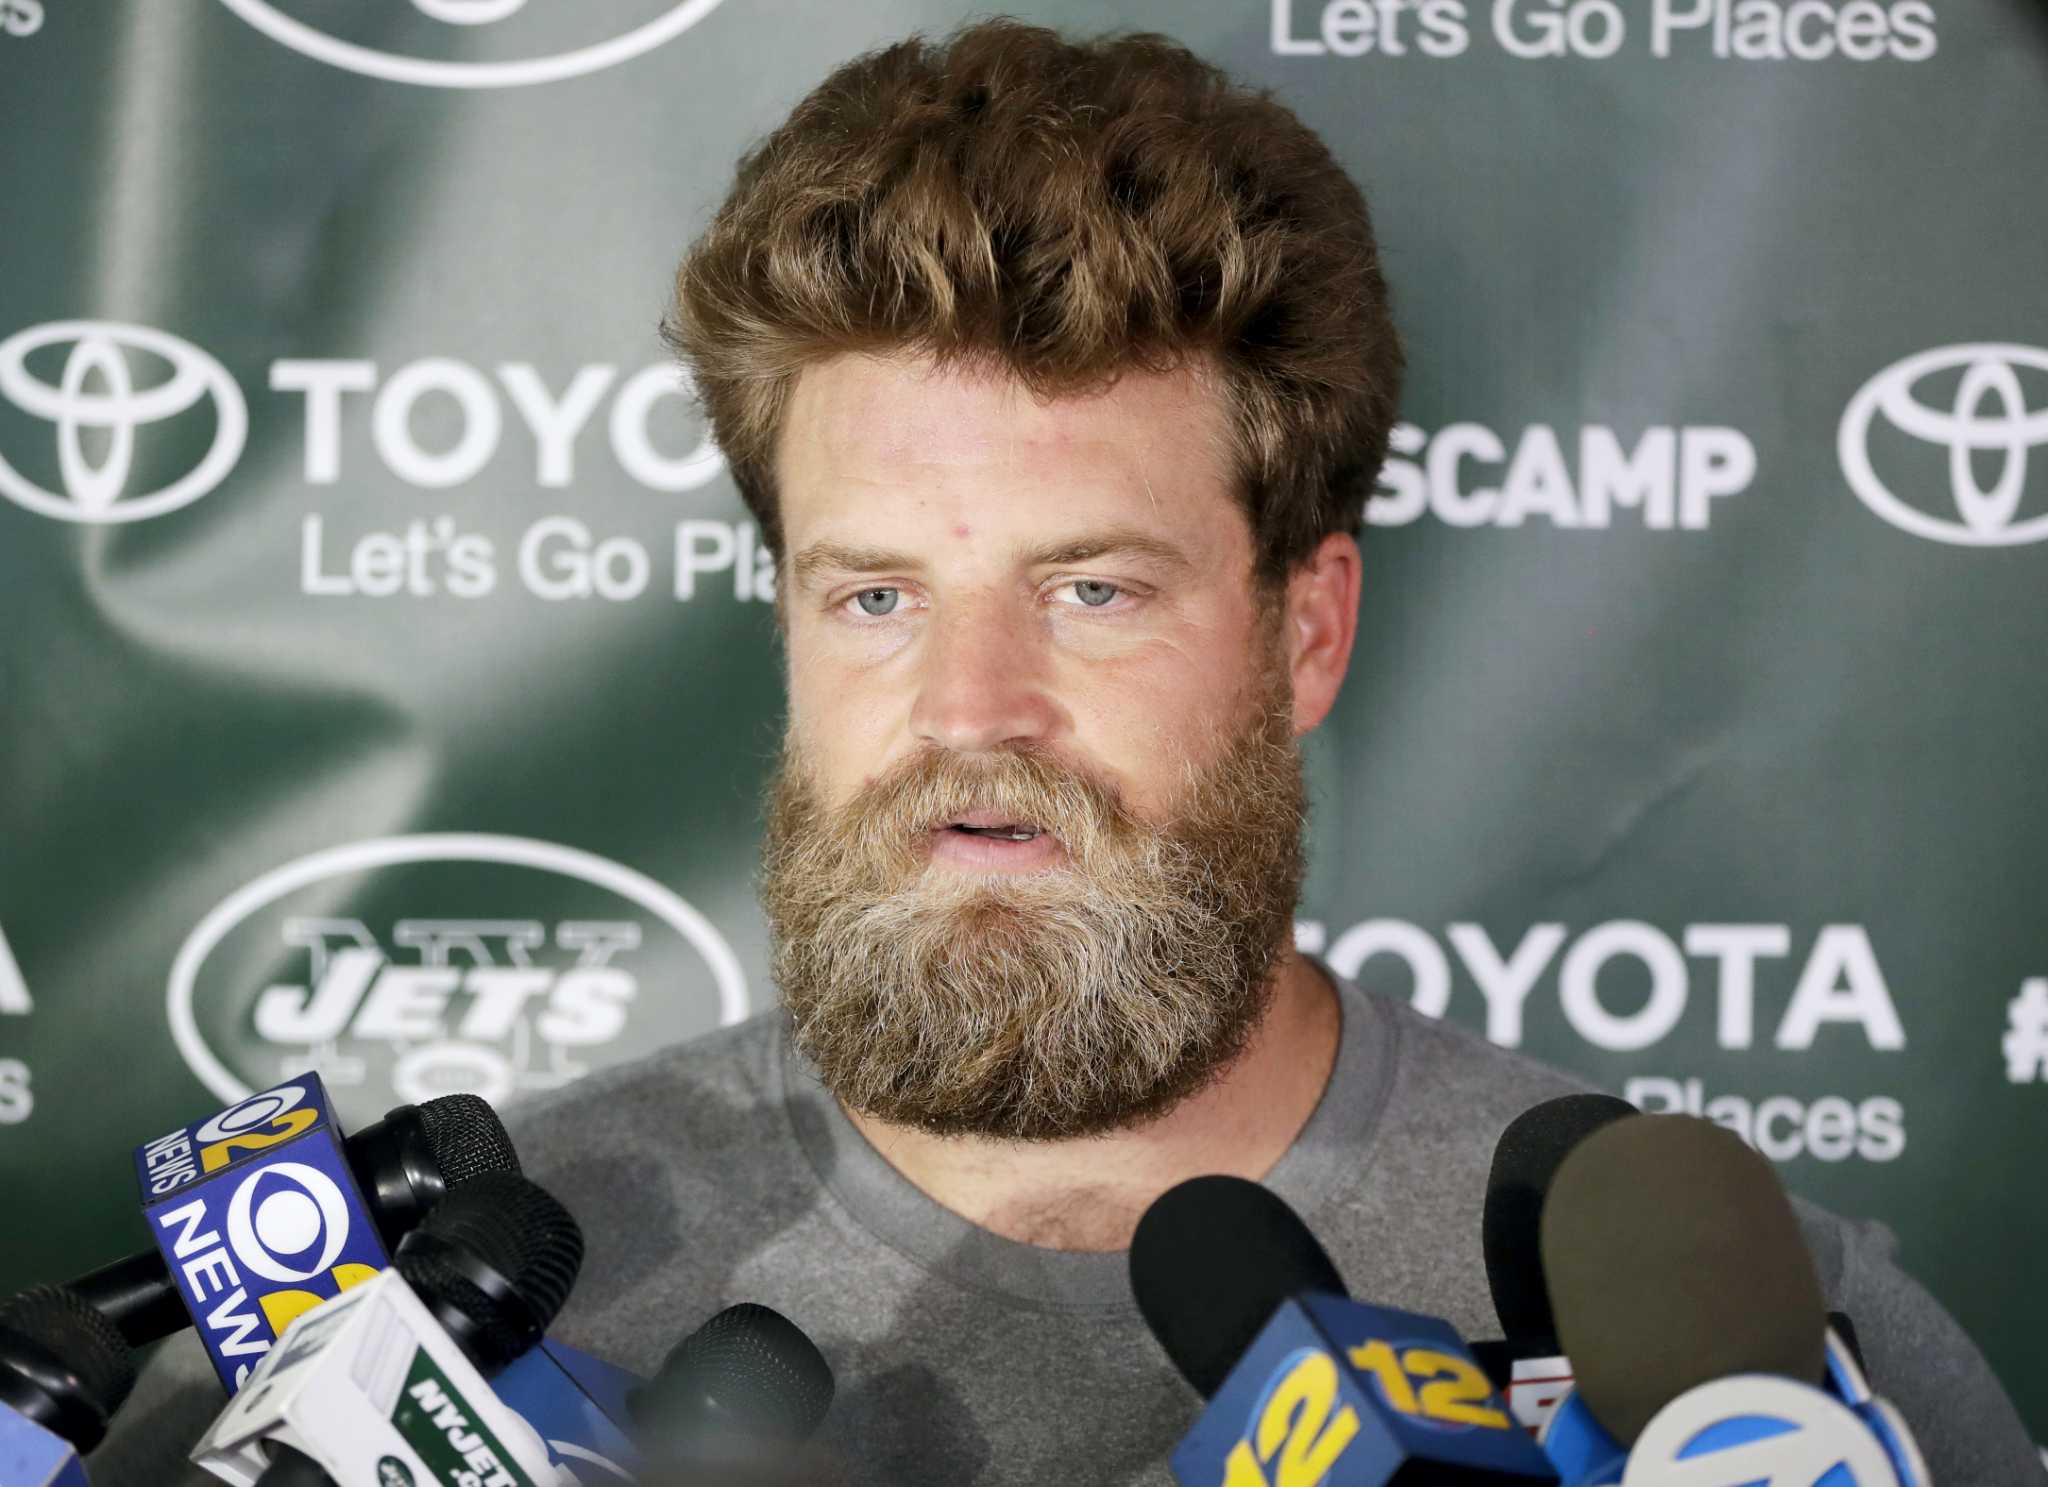 Jets rookie Burris got to buzz Fitzpatrick's hair after INT